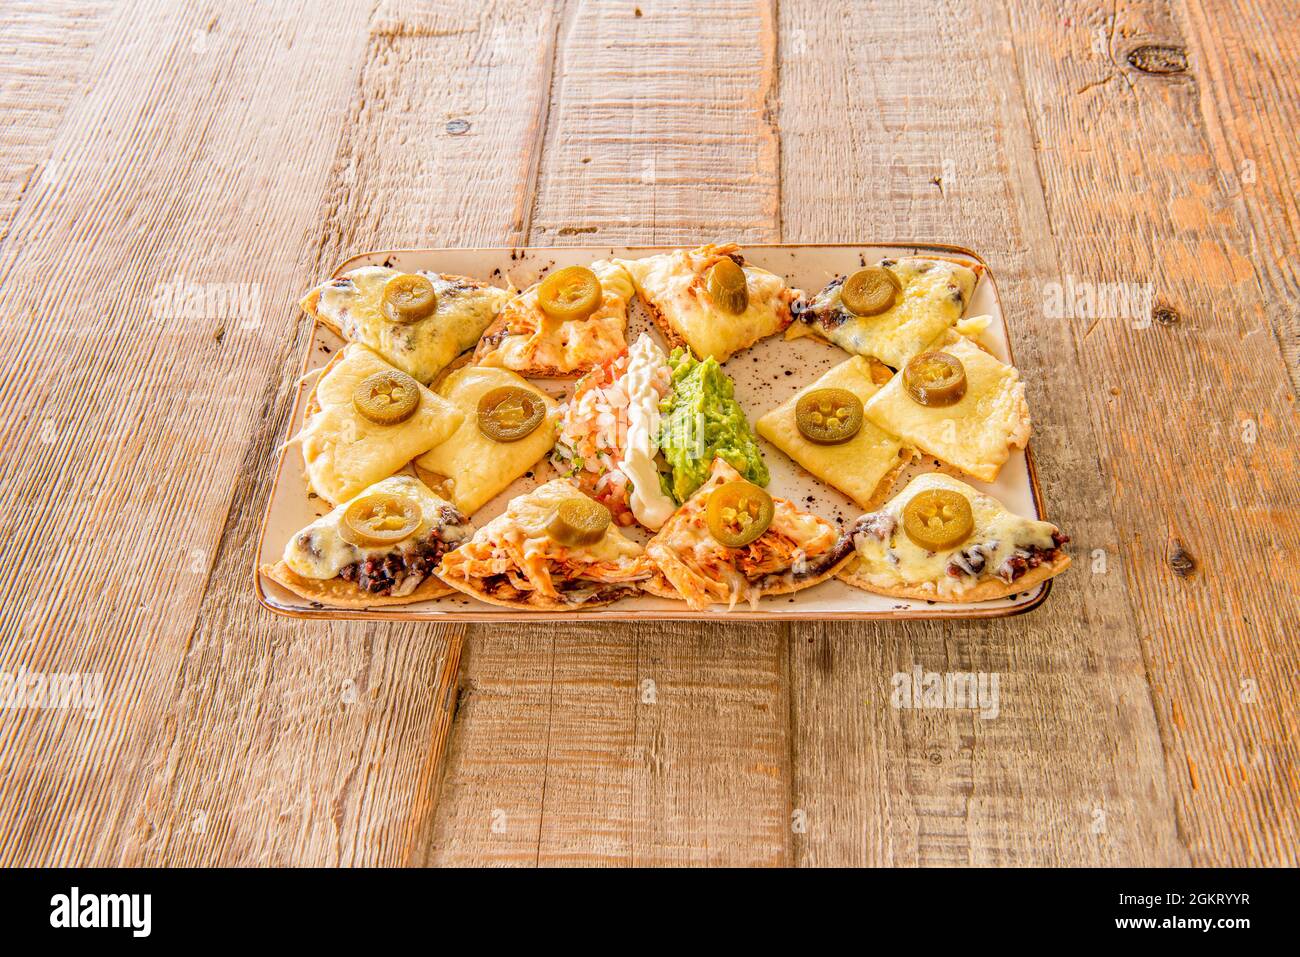 Version of nachos with guacamole with a lot of melted cheese in each portion of a wheat flour tortilla with jalapenos and on a light wooden table Stock Photo